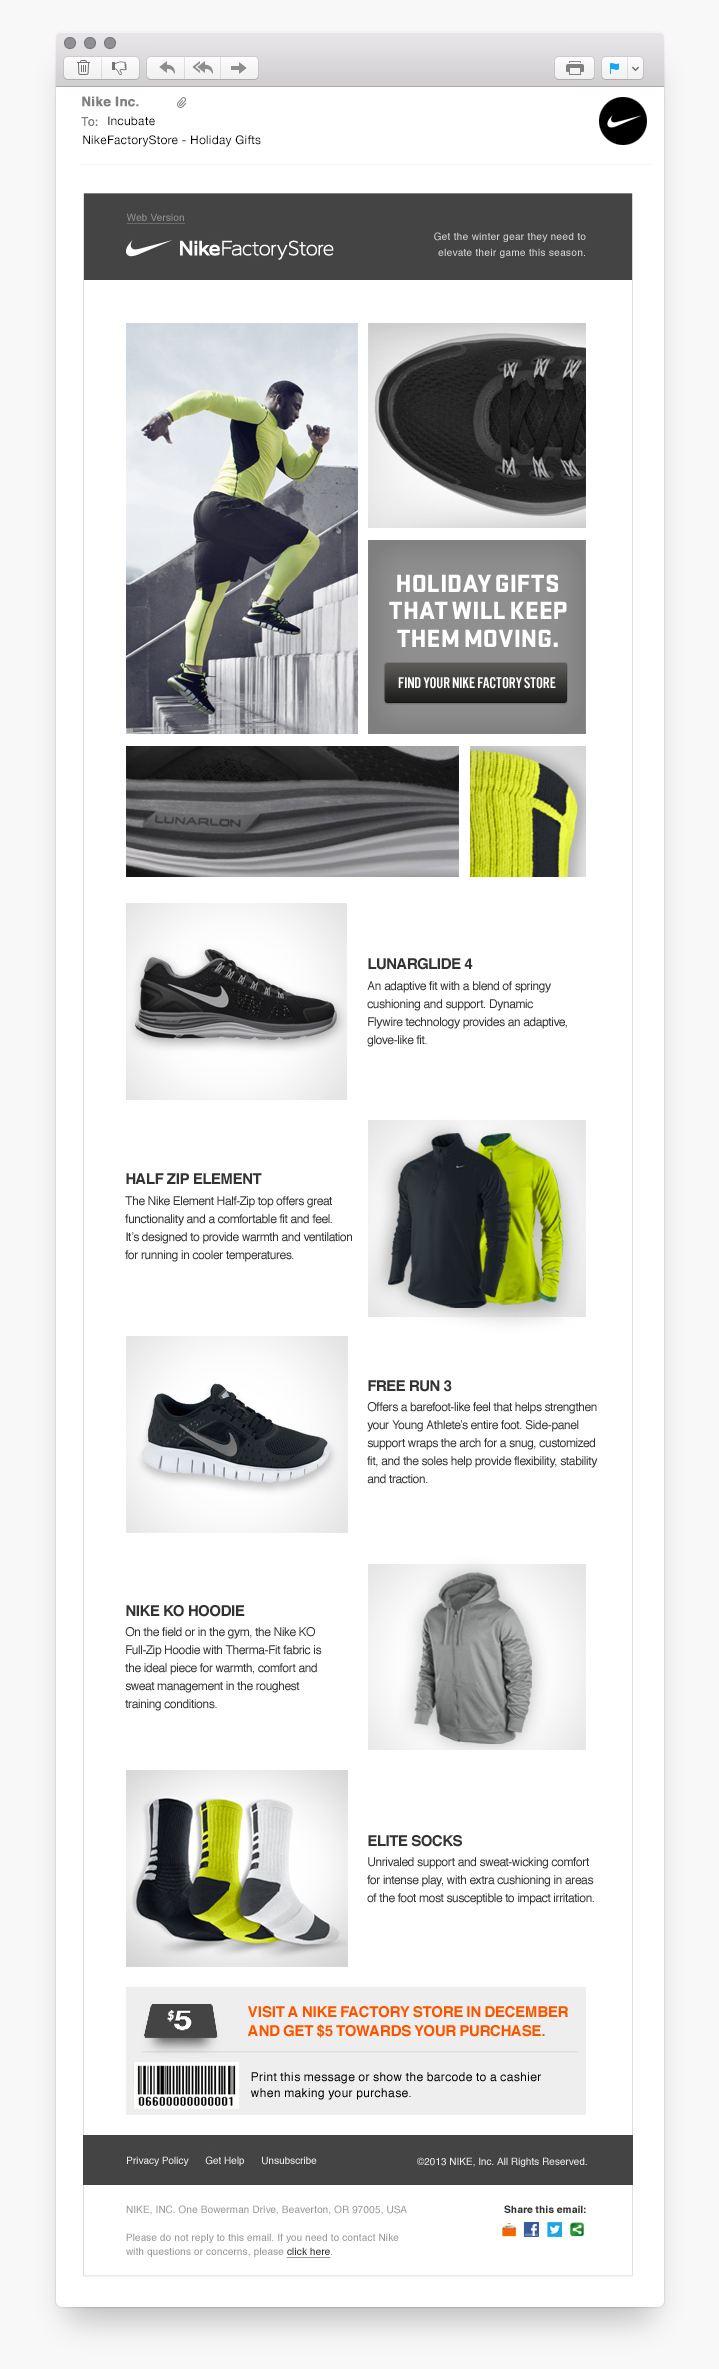 Nike Factory Store Email Standard Guide